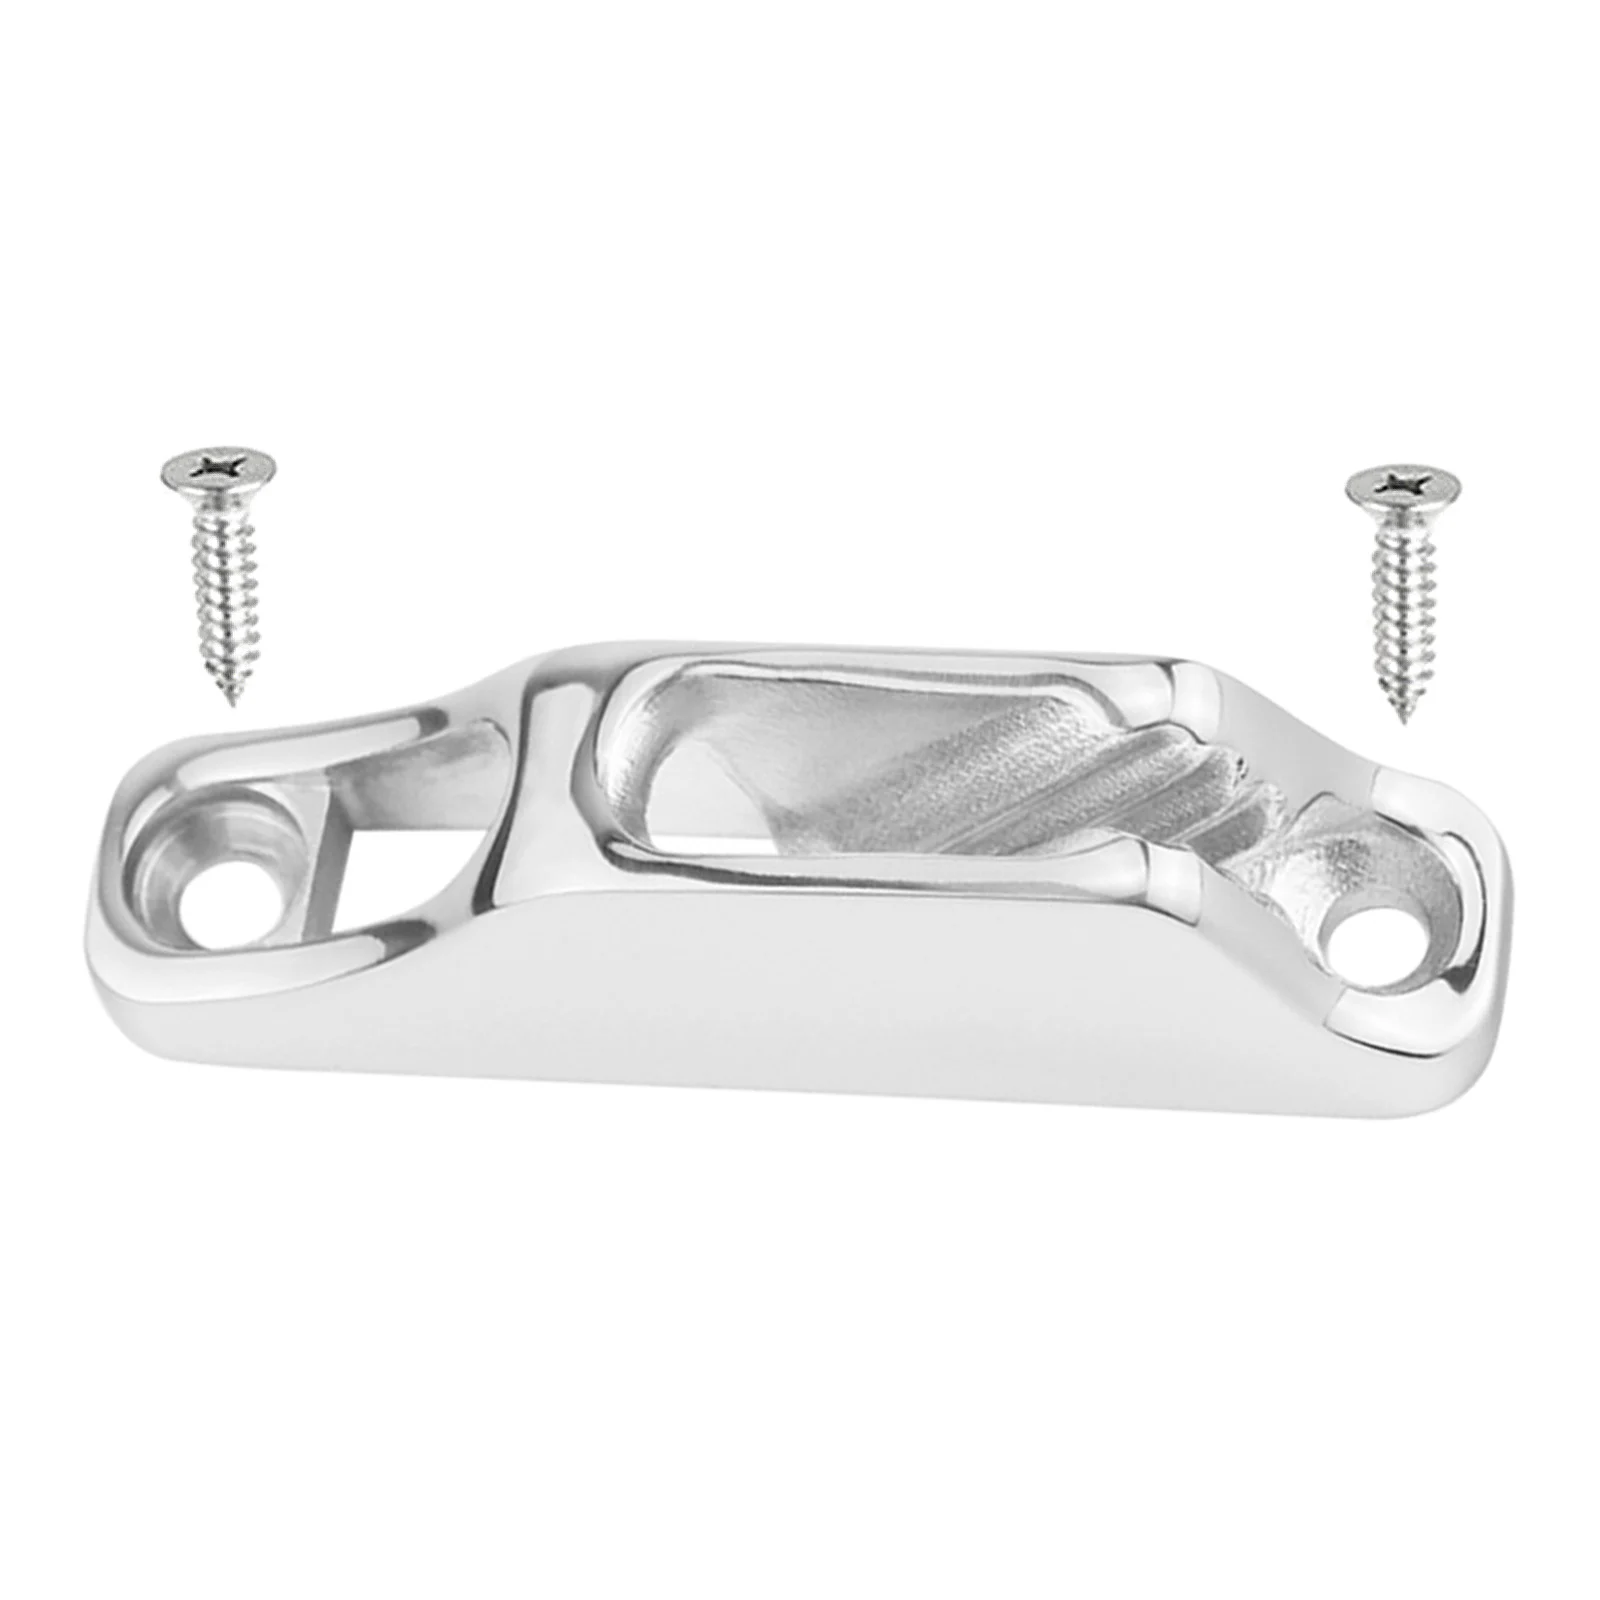 Durable 316 Stainless Steel Boat Clam Cleat Rope Cleat Jam Cleat line cleat Boat Parts Hardware marine Accessories